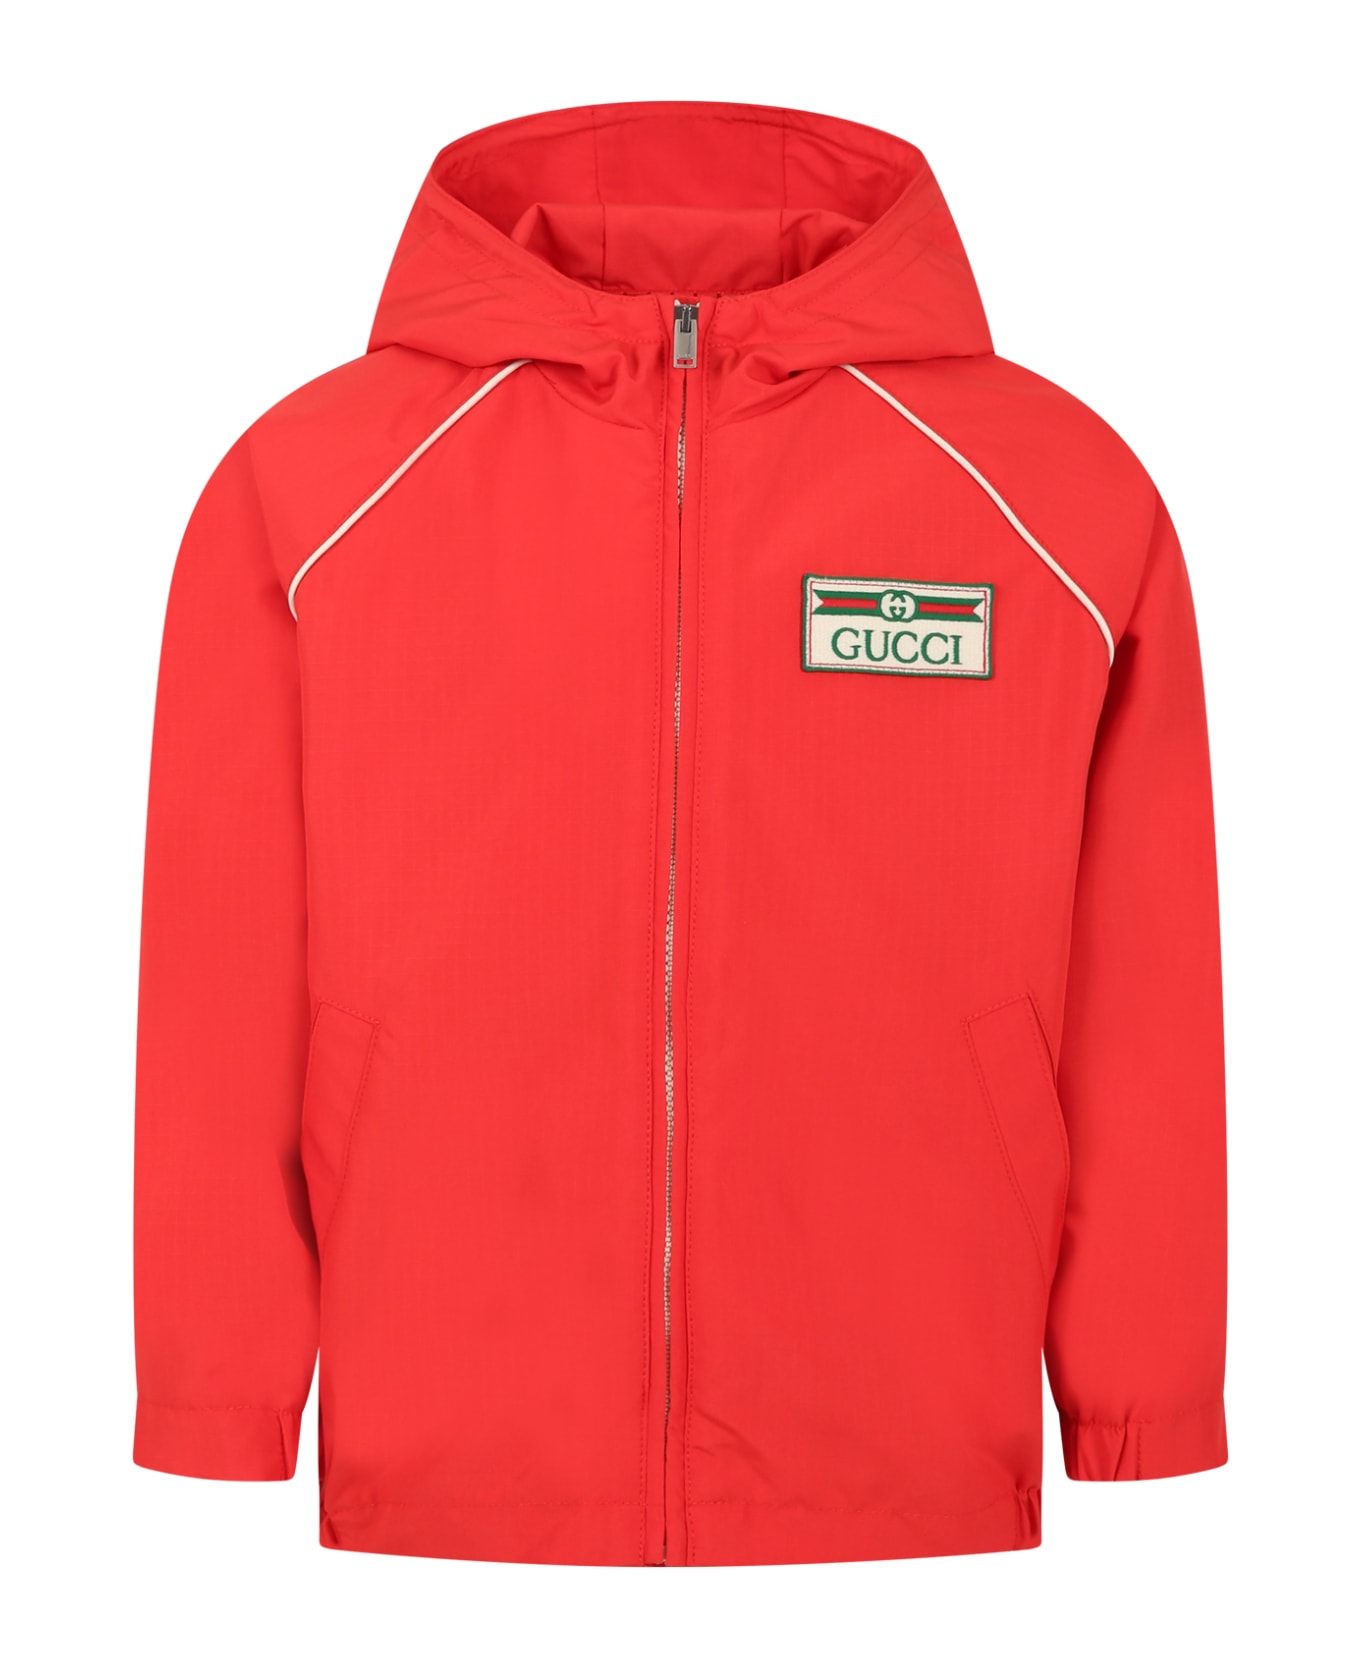 Gucci Red Jacket For Kids With Vintage Logo - Red